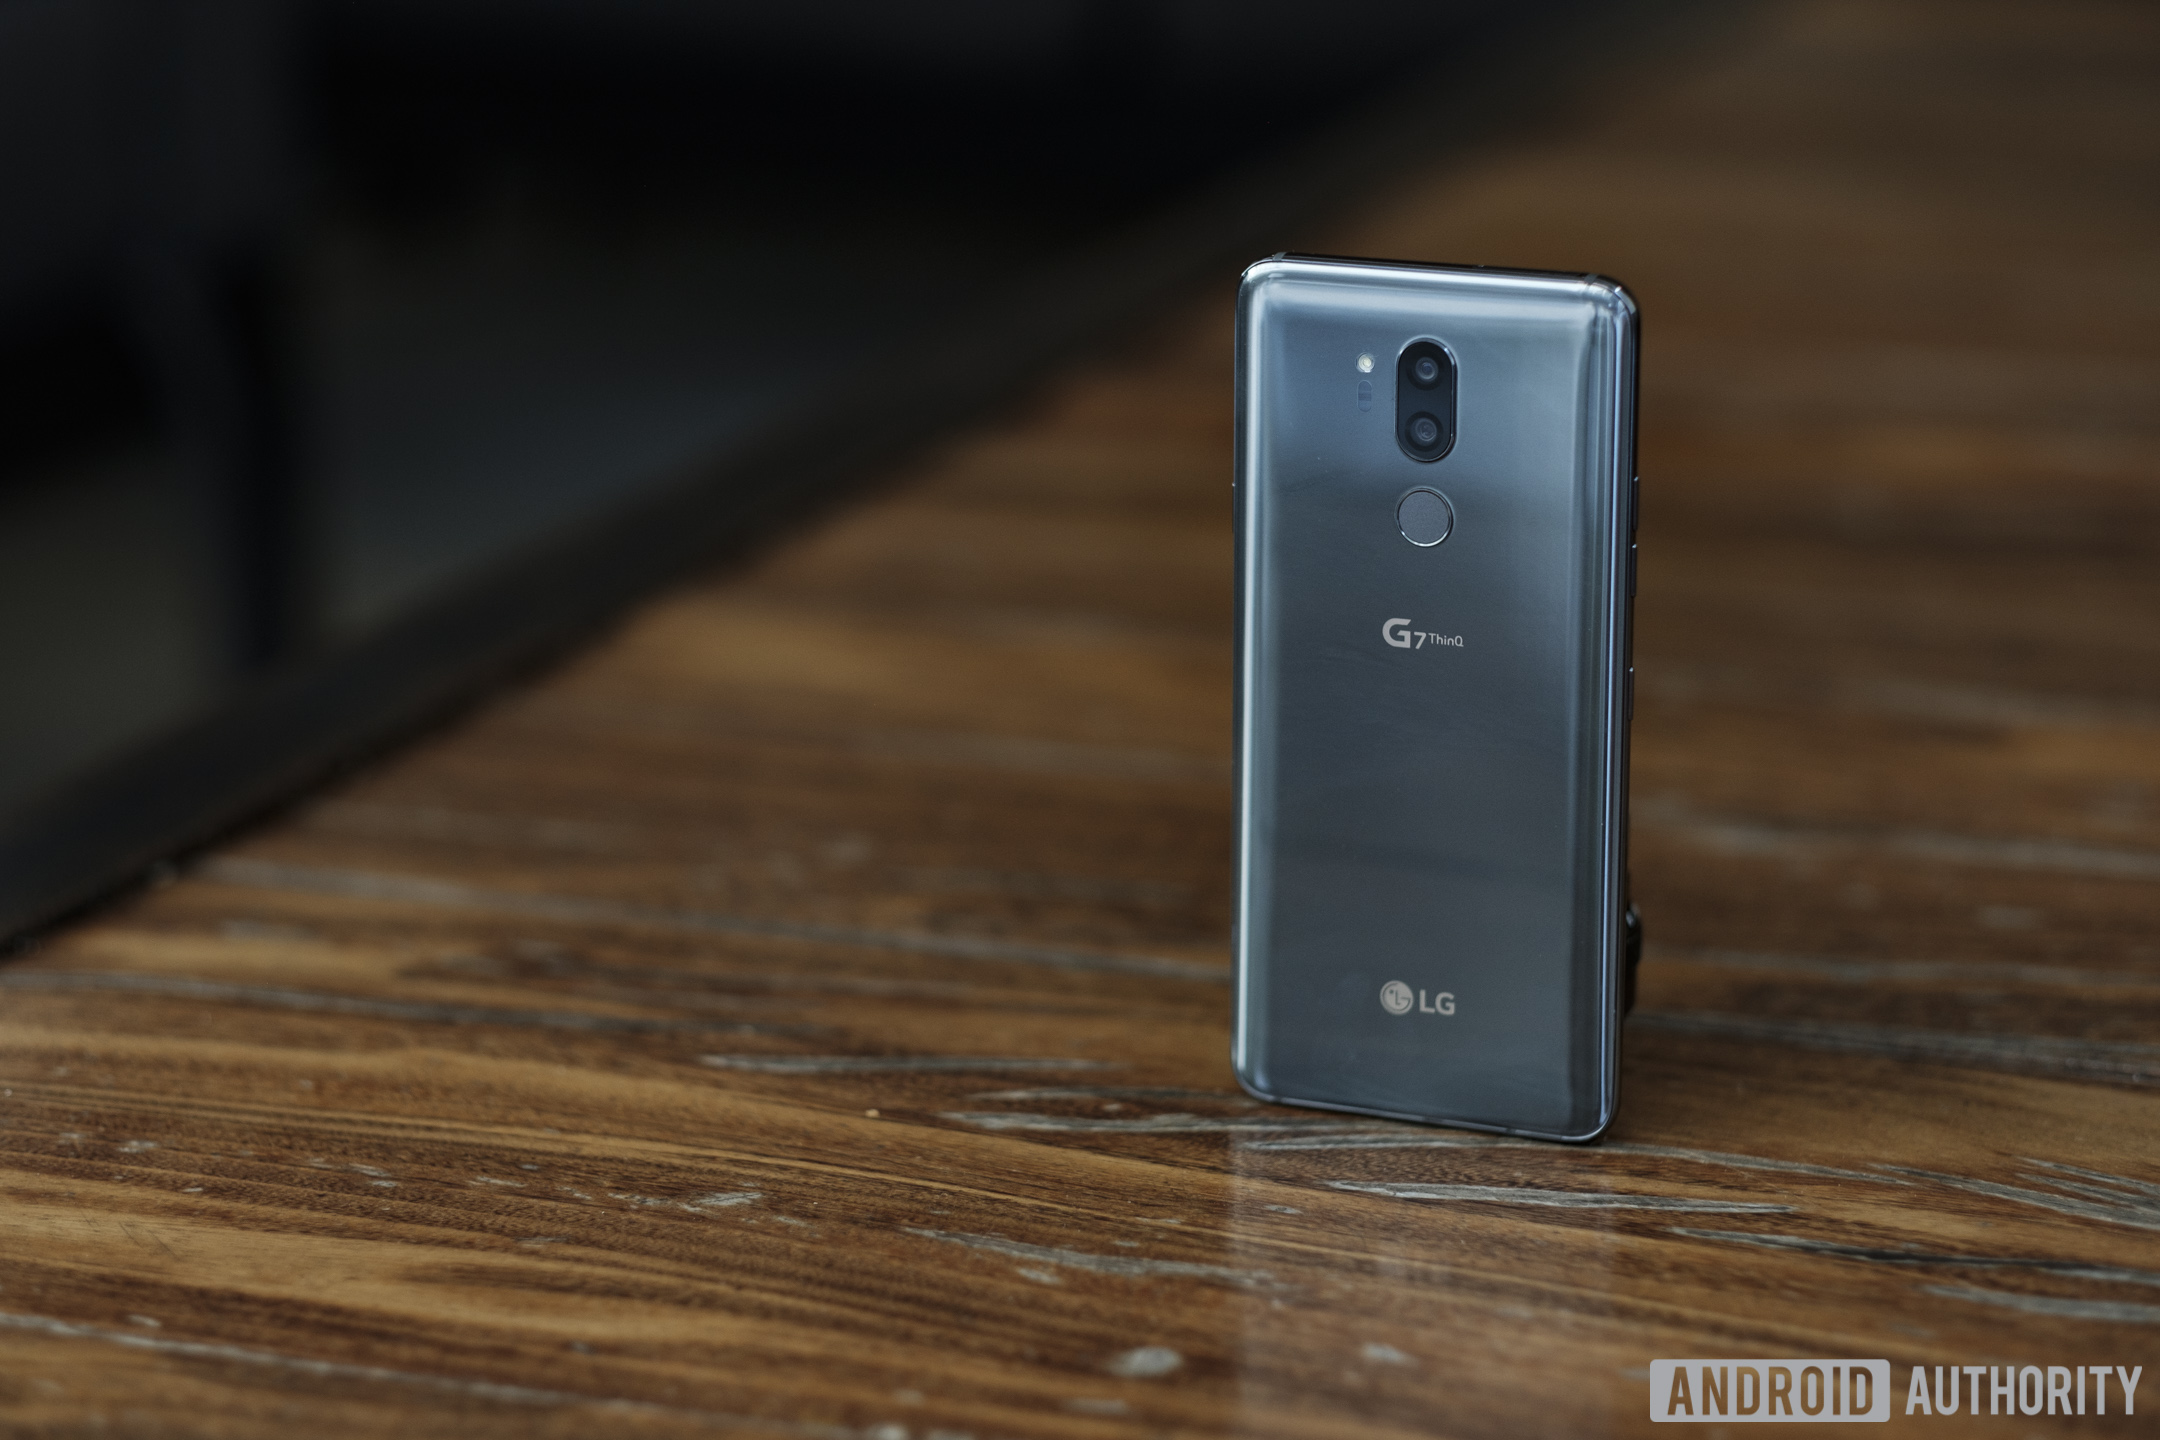 LG G7 ThinQ rear side camera and speaker